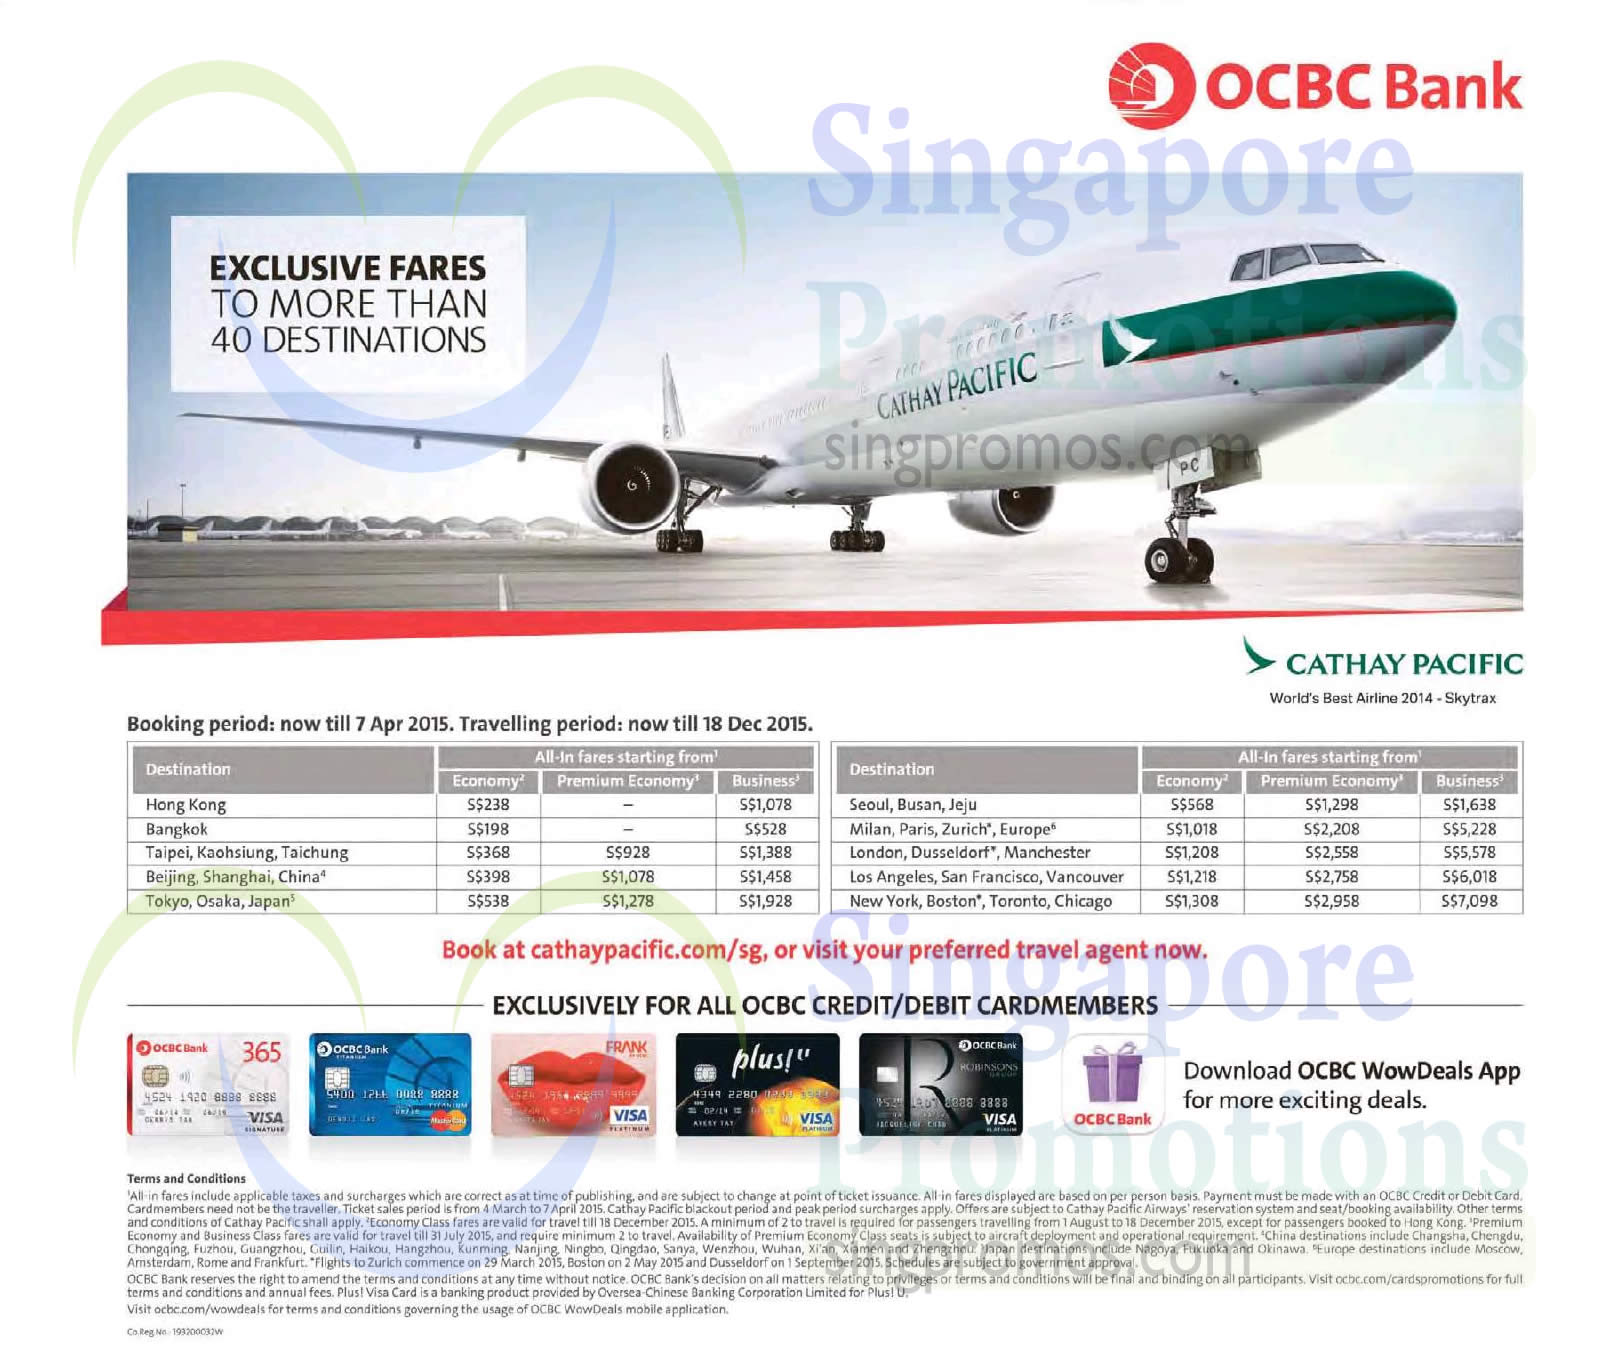 Featured image for Cathay Pacific From $228 Promo Fares For OCBC Cardmembers 3 Mar - 7 Apr 2015